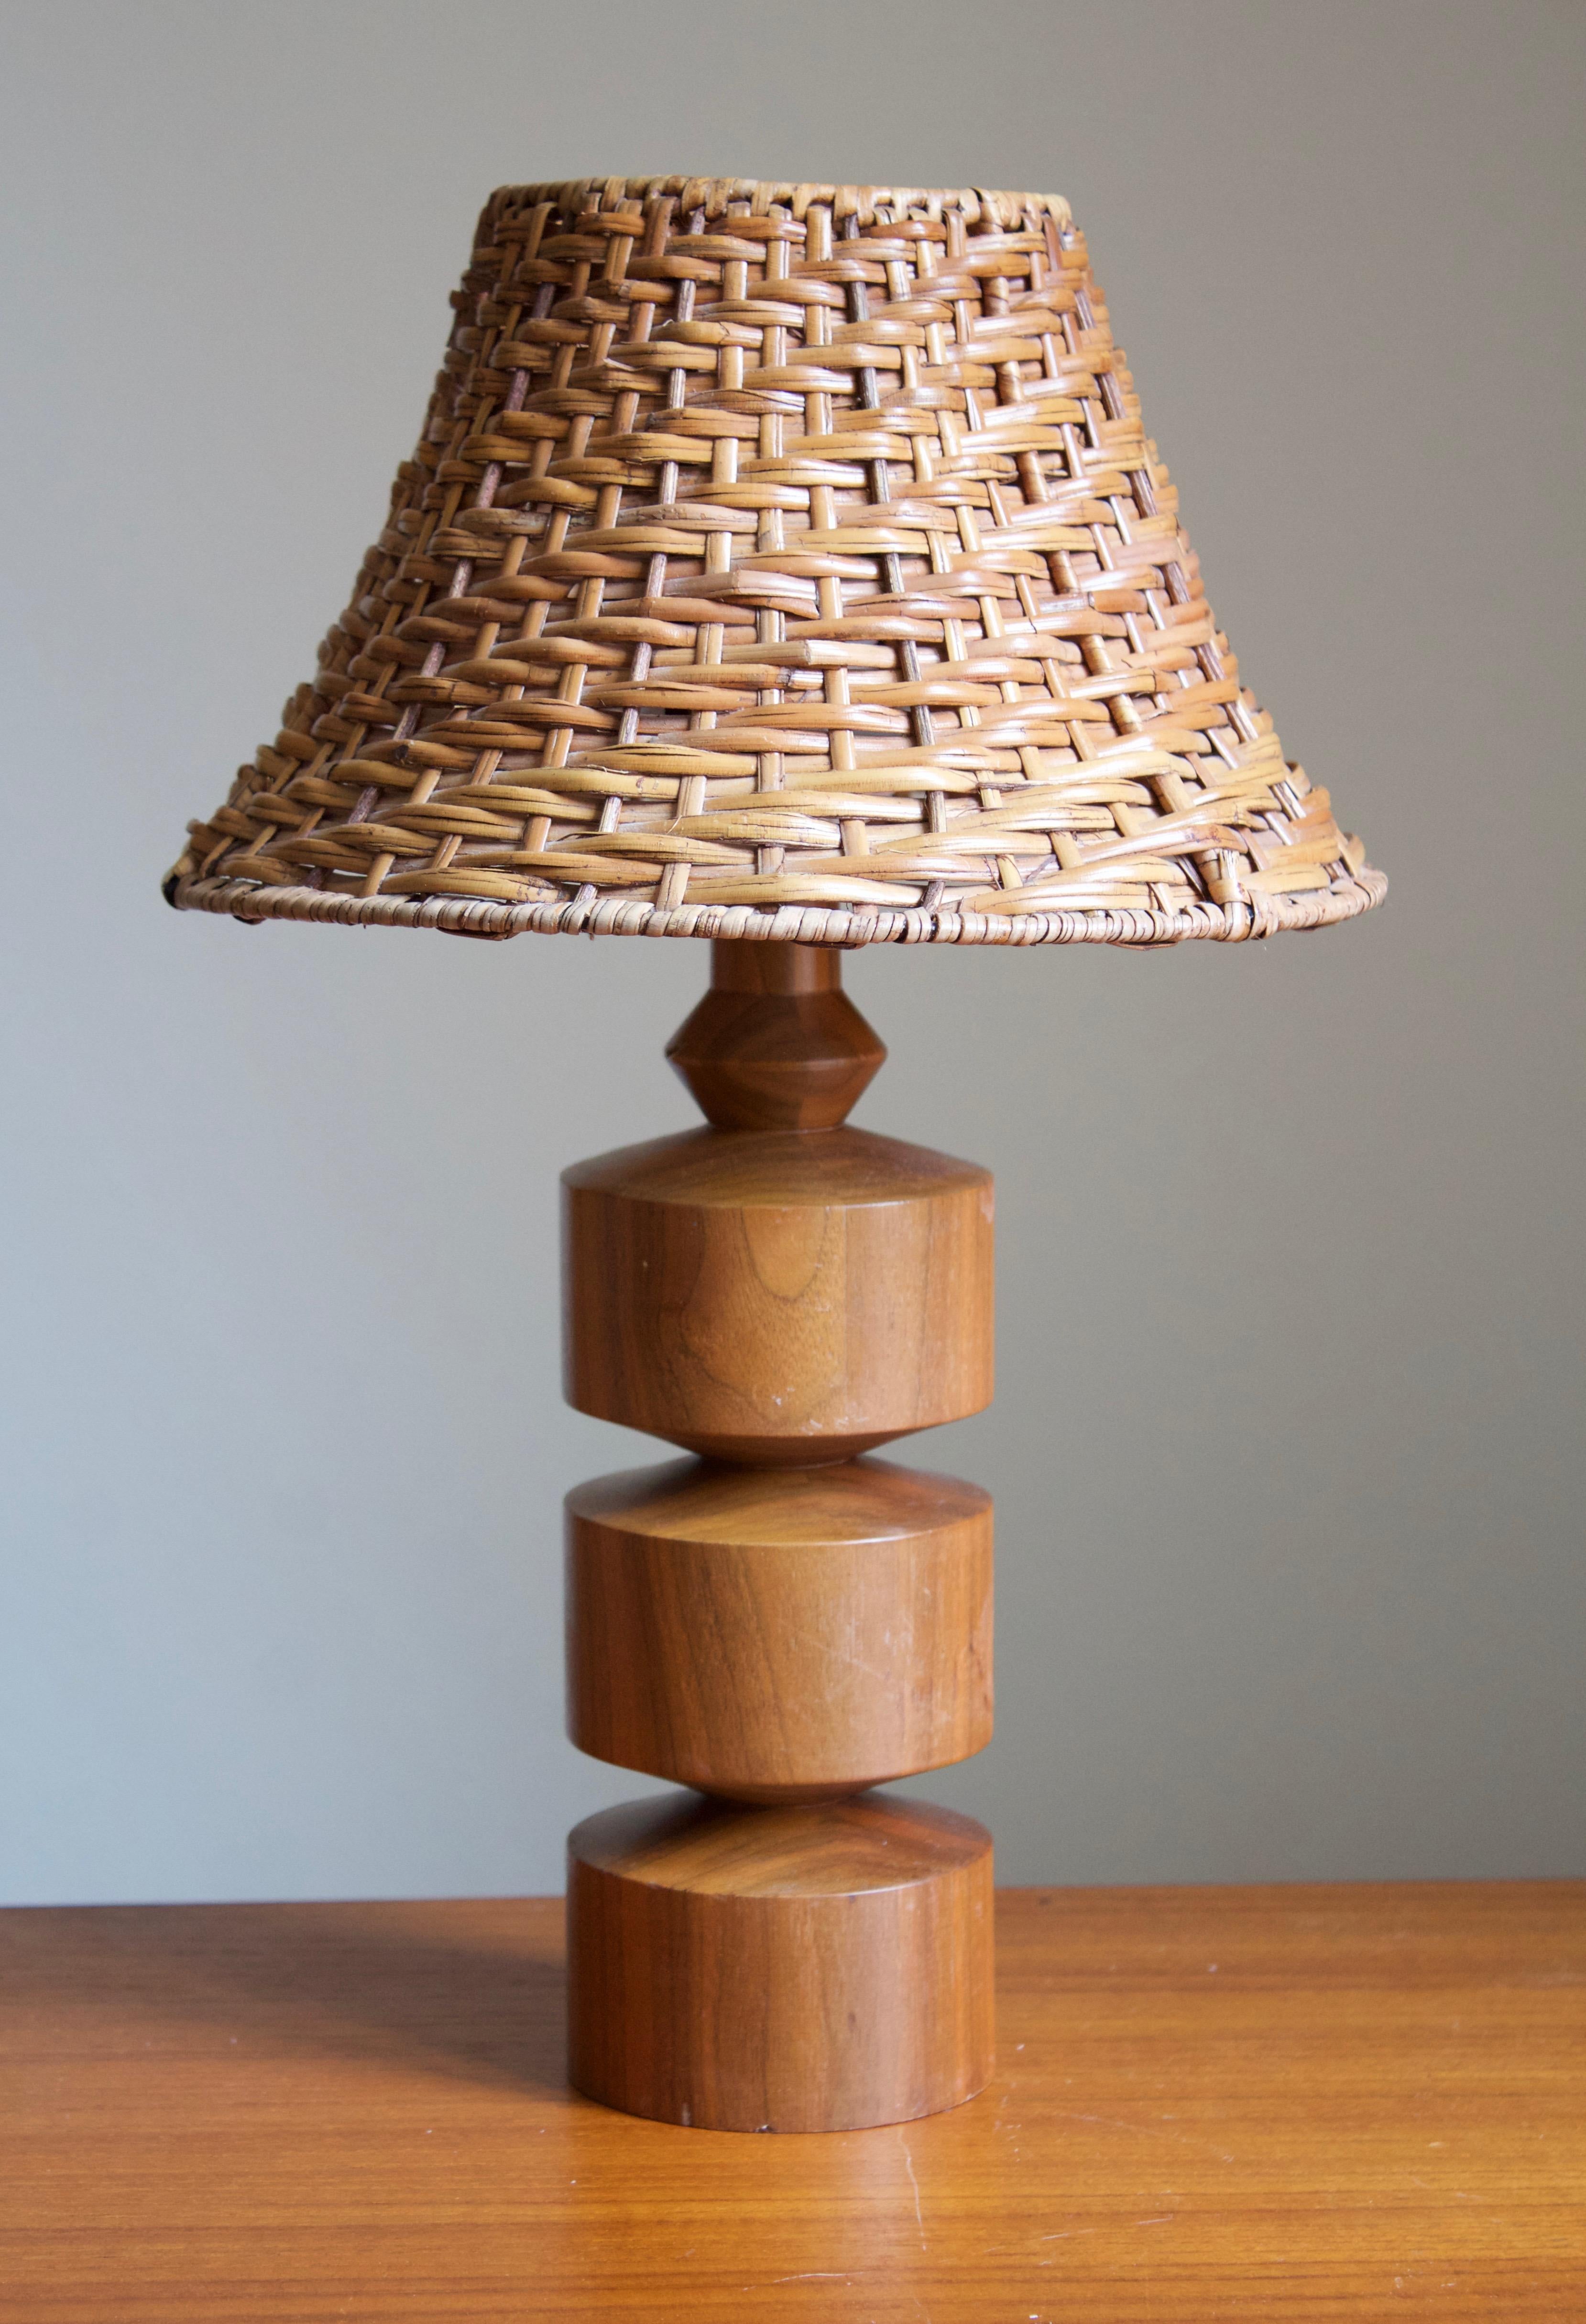 A table lamp. In solid turned teak. By unknown Swedish designer and producer, 1950s-1960s.

Stated dimensions exclude lampshade, height includes the socket. Lampshade of illustrated model can be included upon request.